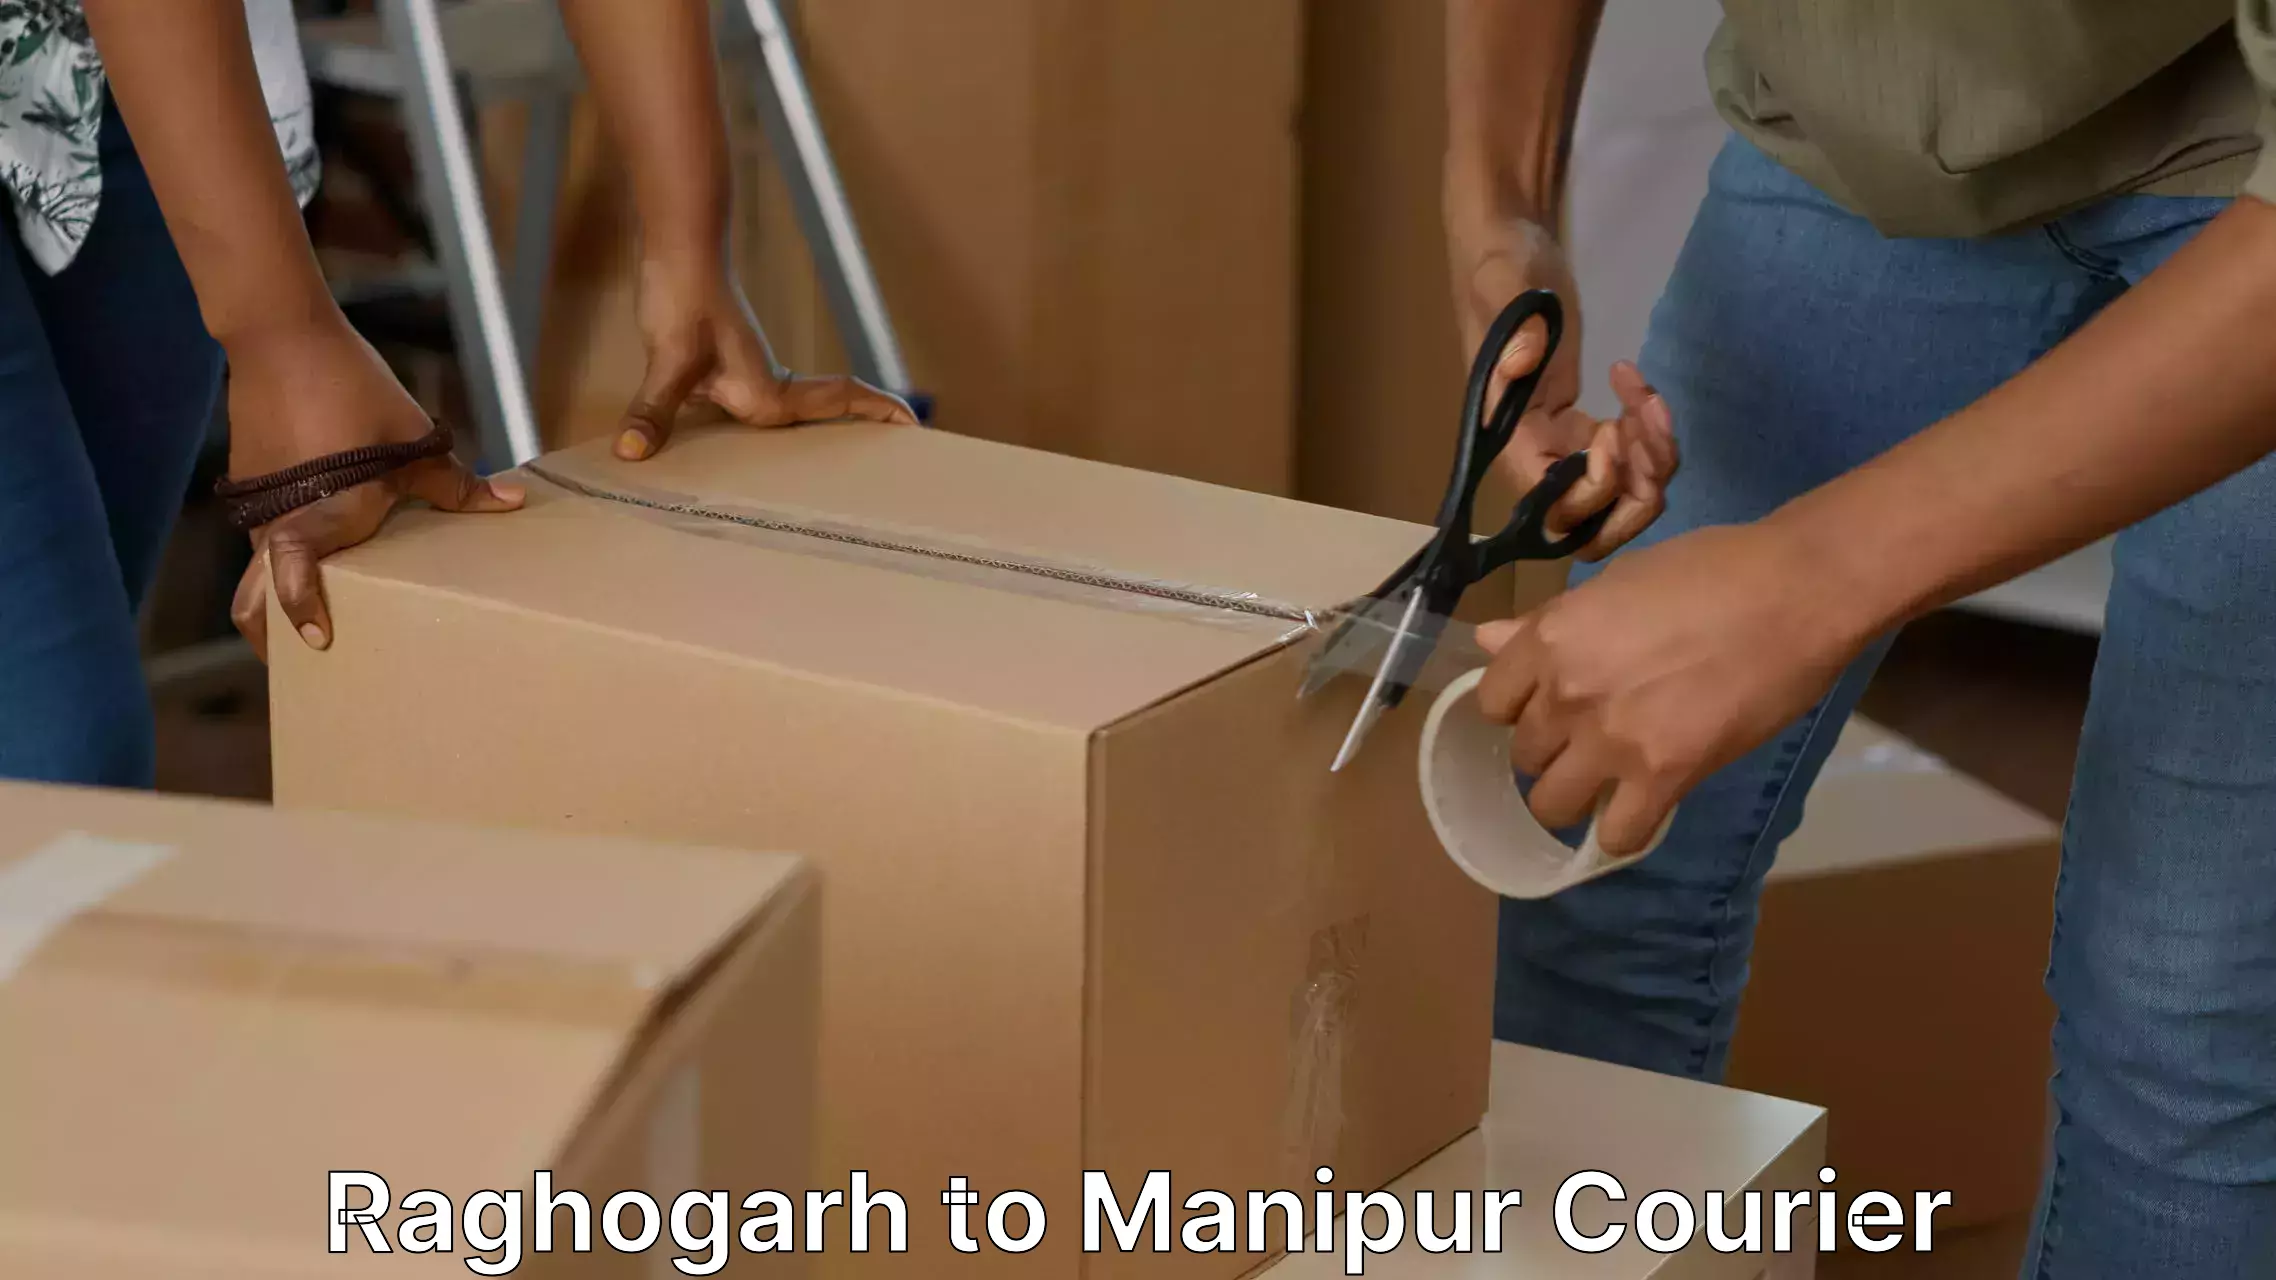 Furniture delivery service Raghogarh to Moirang